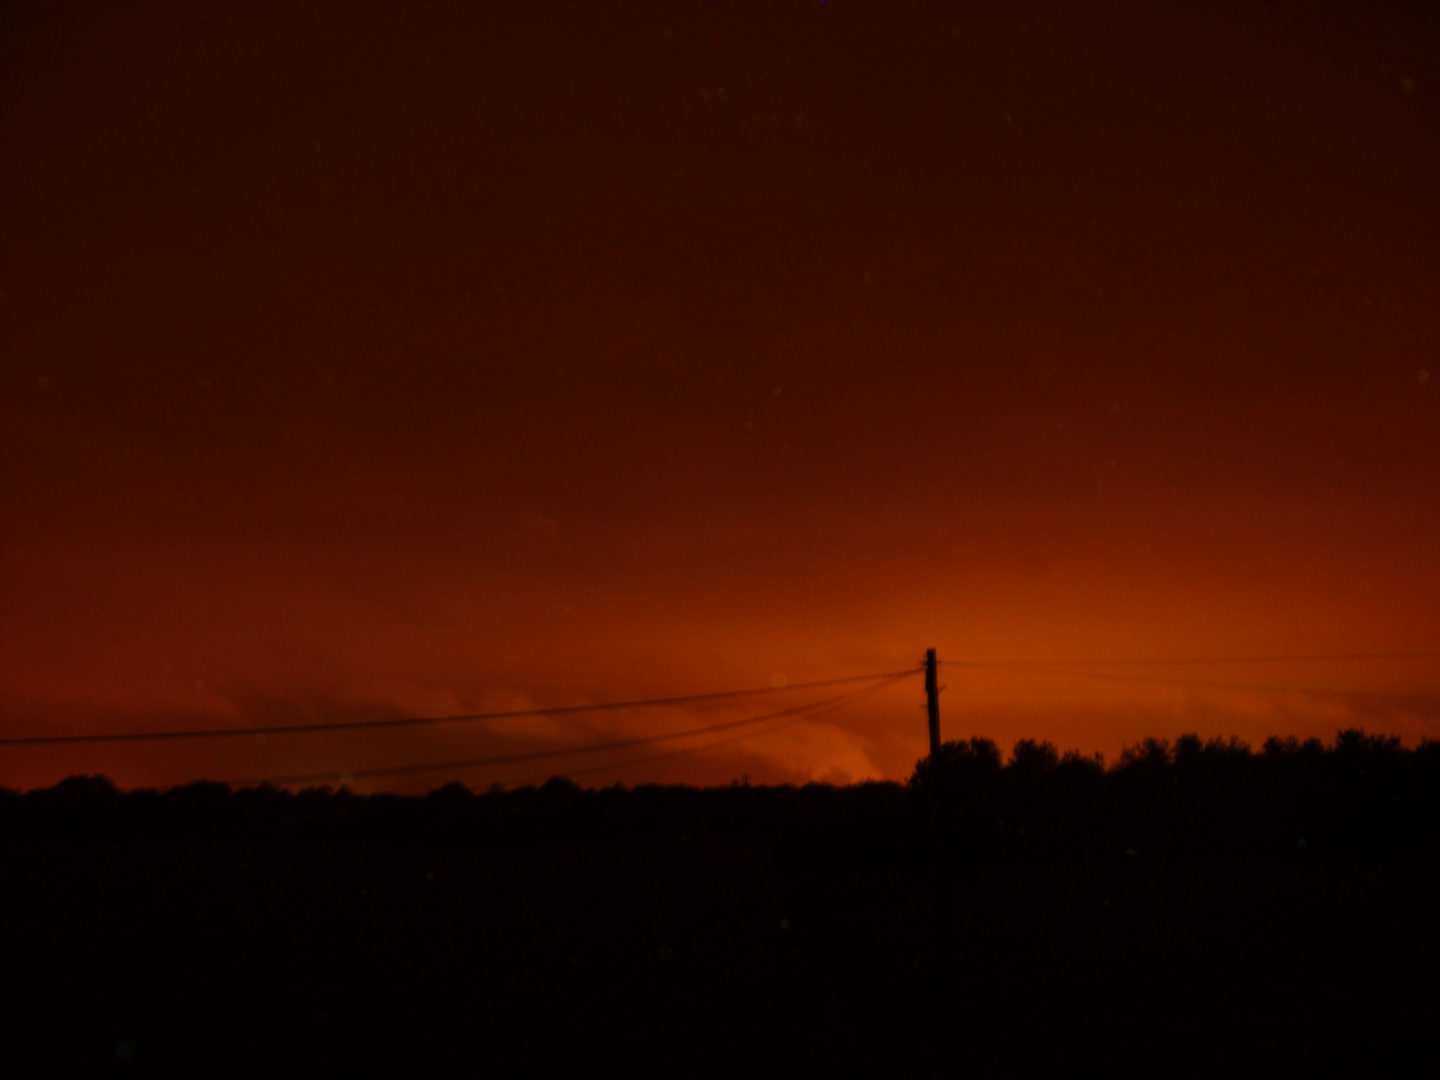 Glow from a distant town colouring the night sky orange-red